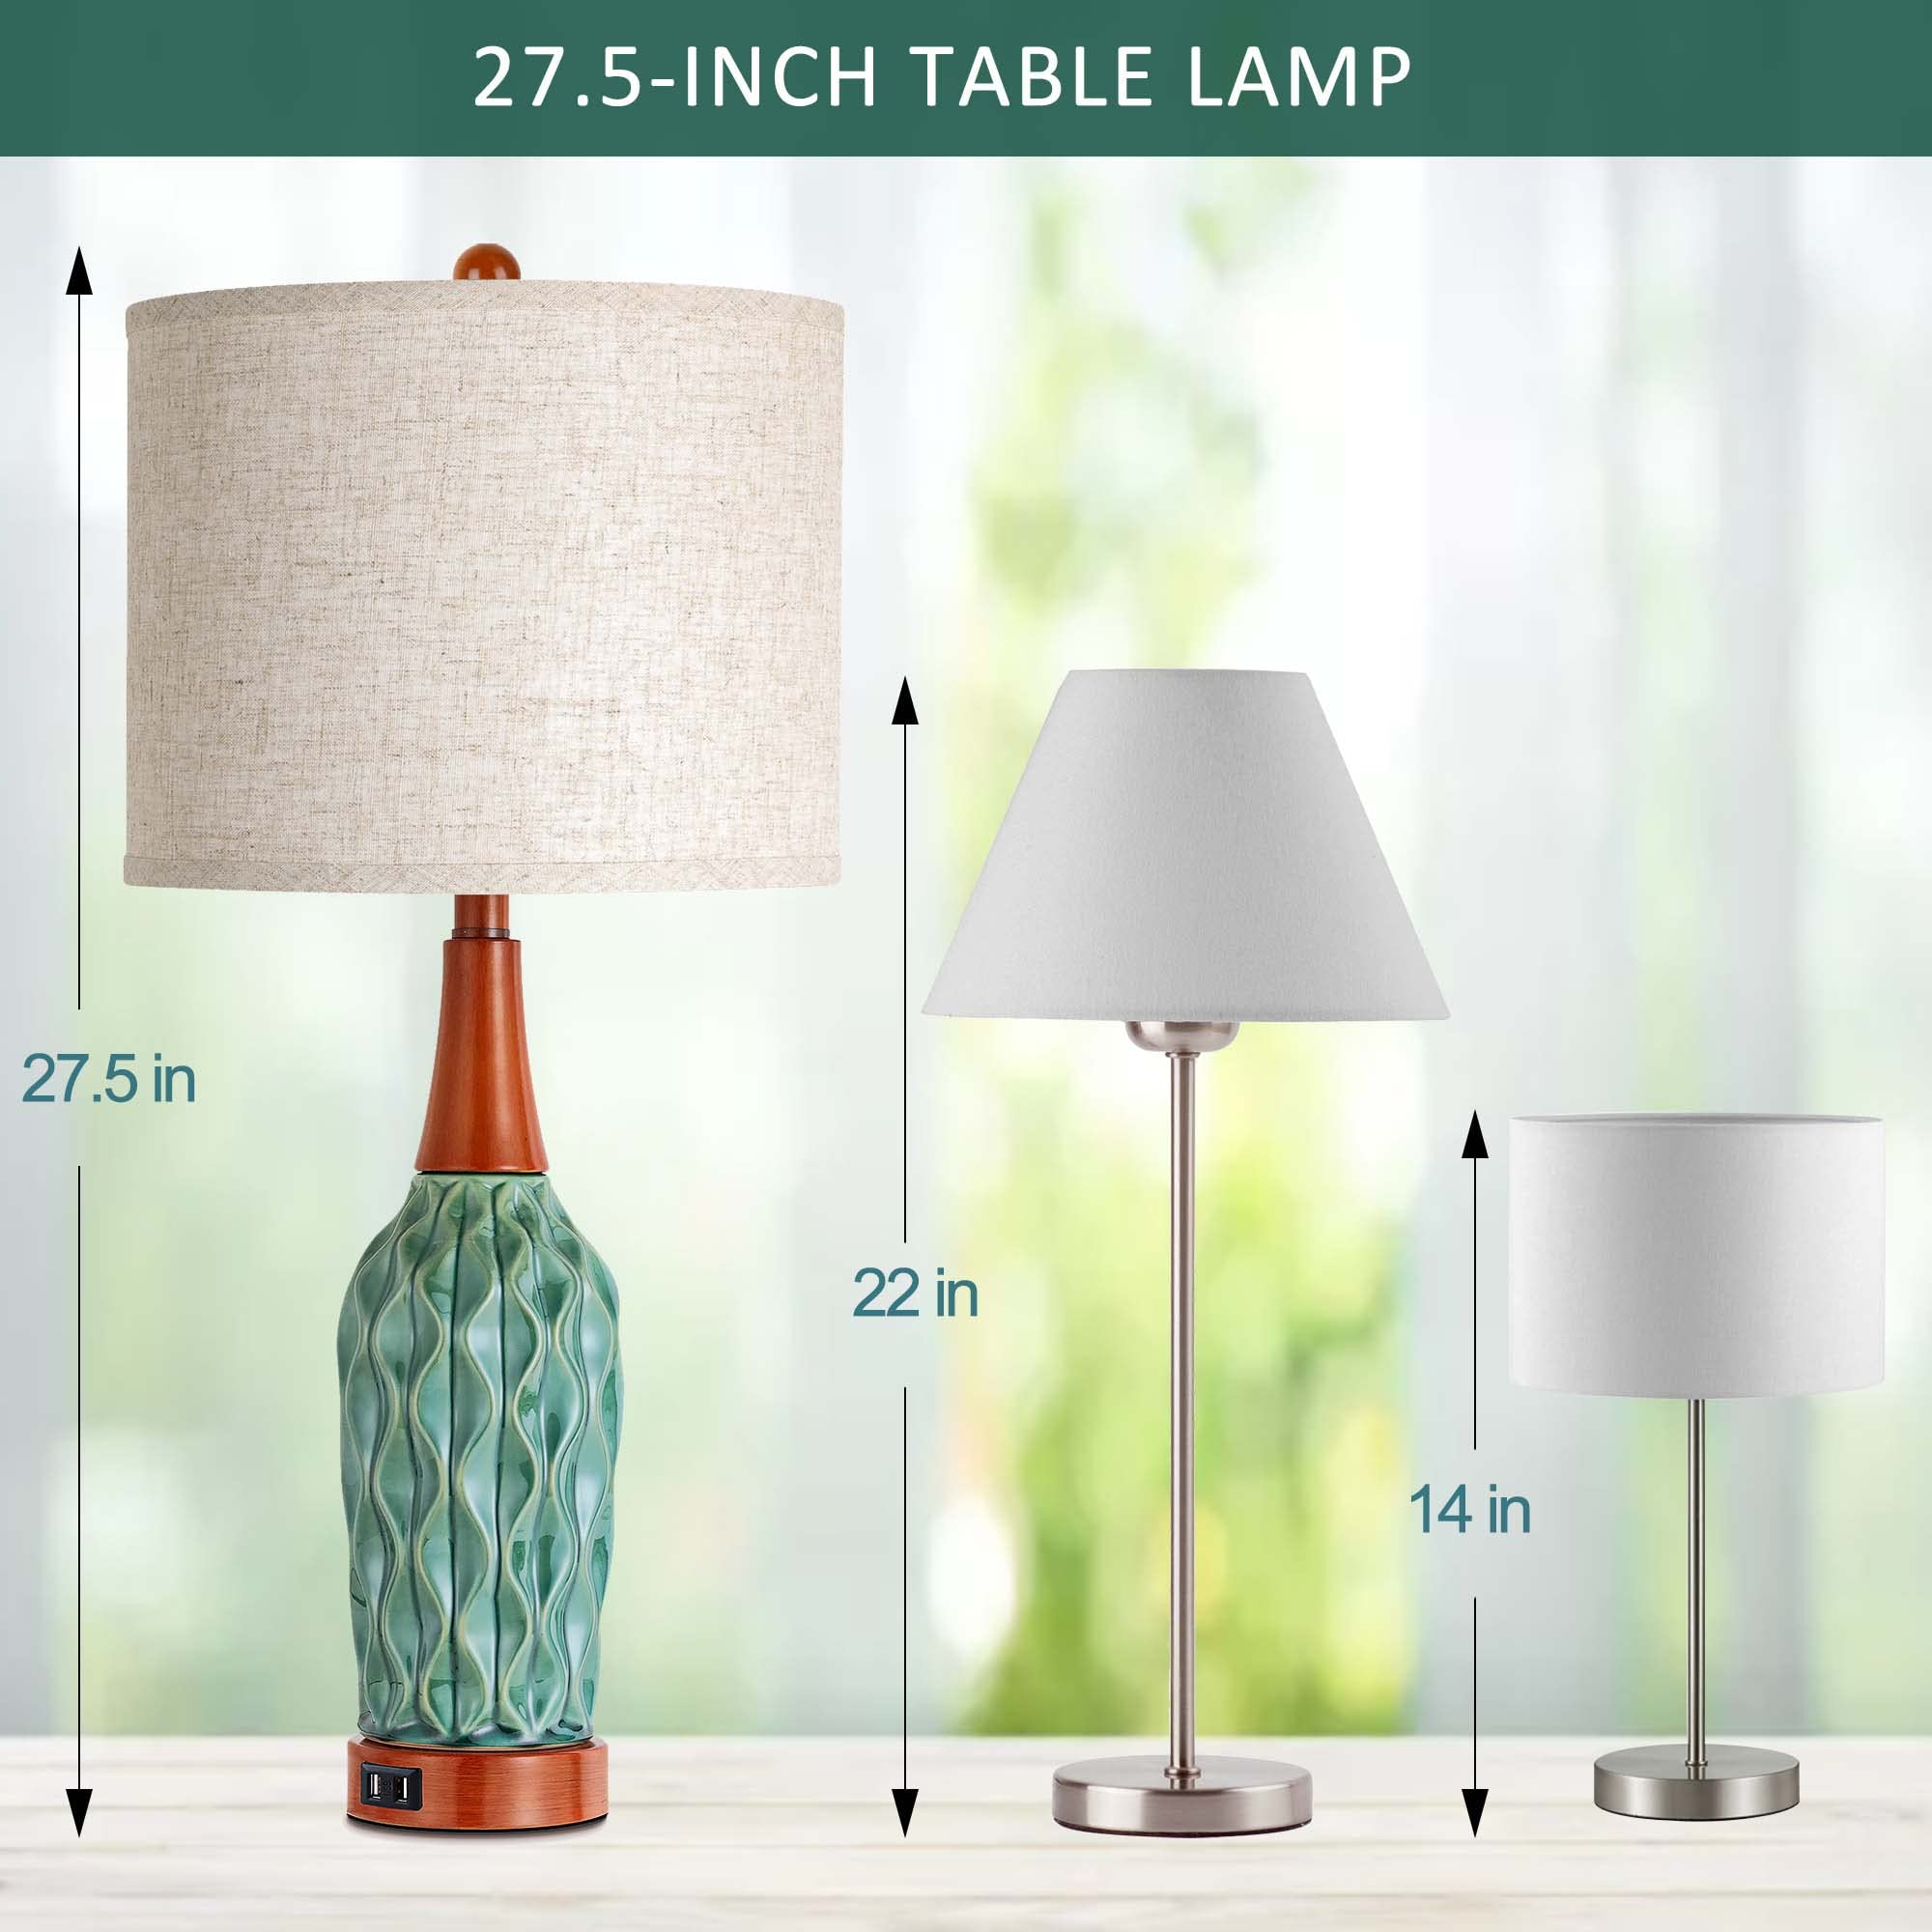 Vintage Table Lamps for Living Room Set of 2, Retro Bedside Lamp for Bedroom with USB Port, MCM Teal Ceramic 3-Way Dimmable Nightstand Lamp with Oatmeal Linen Shade (Bulb Included)